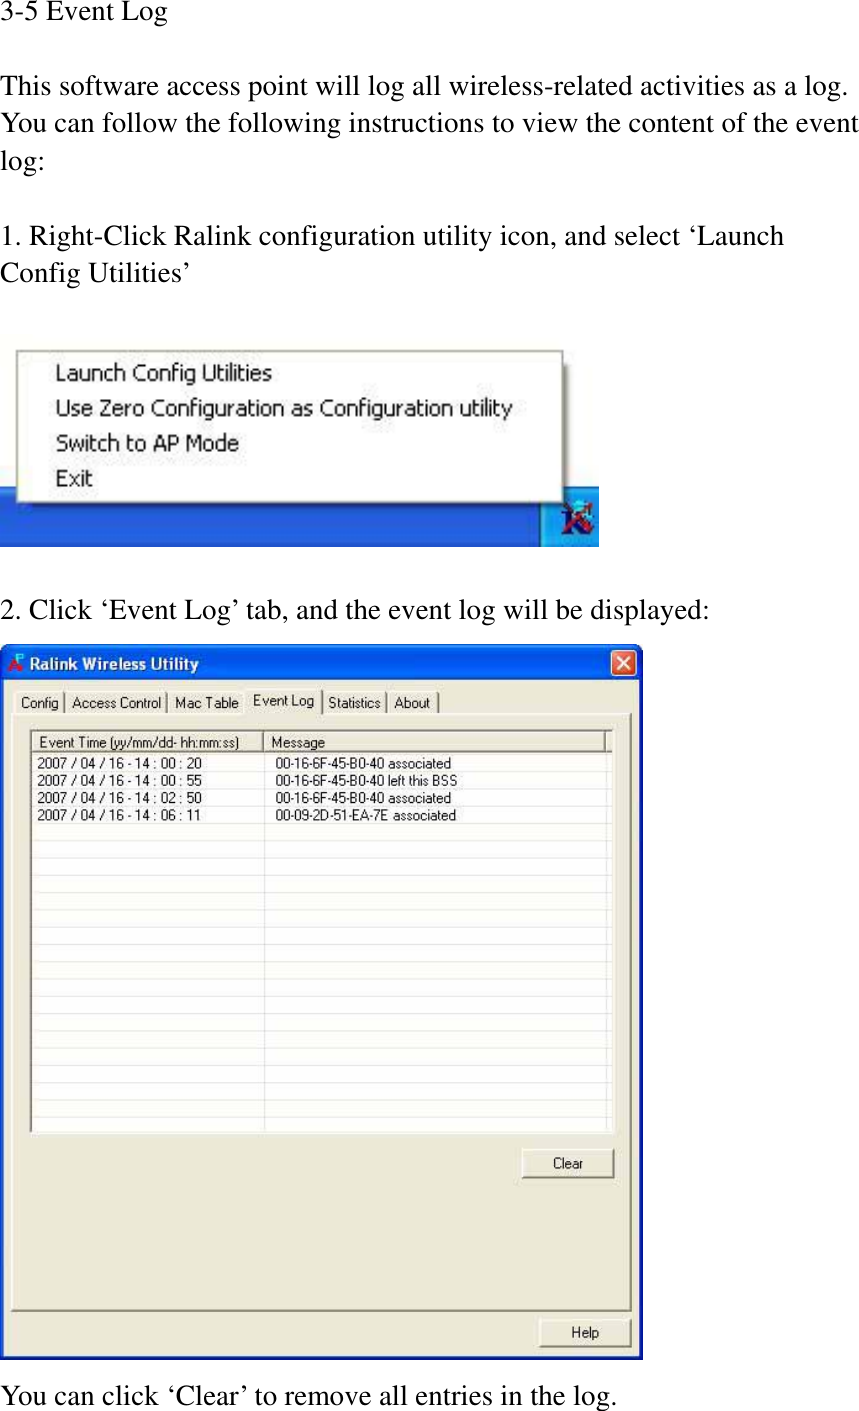 3-5 Event Log This software access point will log all wireless-related activities as a log. You can follow the following instructions to view the content of the event log:1. Right-Click Ralink configuration utility icon, and select ‘Launch Config Utilities’ 2. Click ‘Event Log’ tab, and the event log will be displayed: You can click ‘Clear’ to remove all entries in the log. 